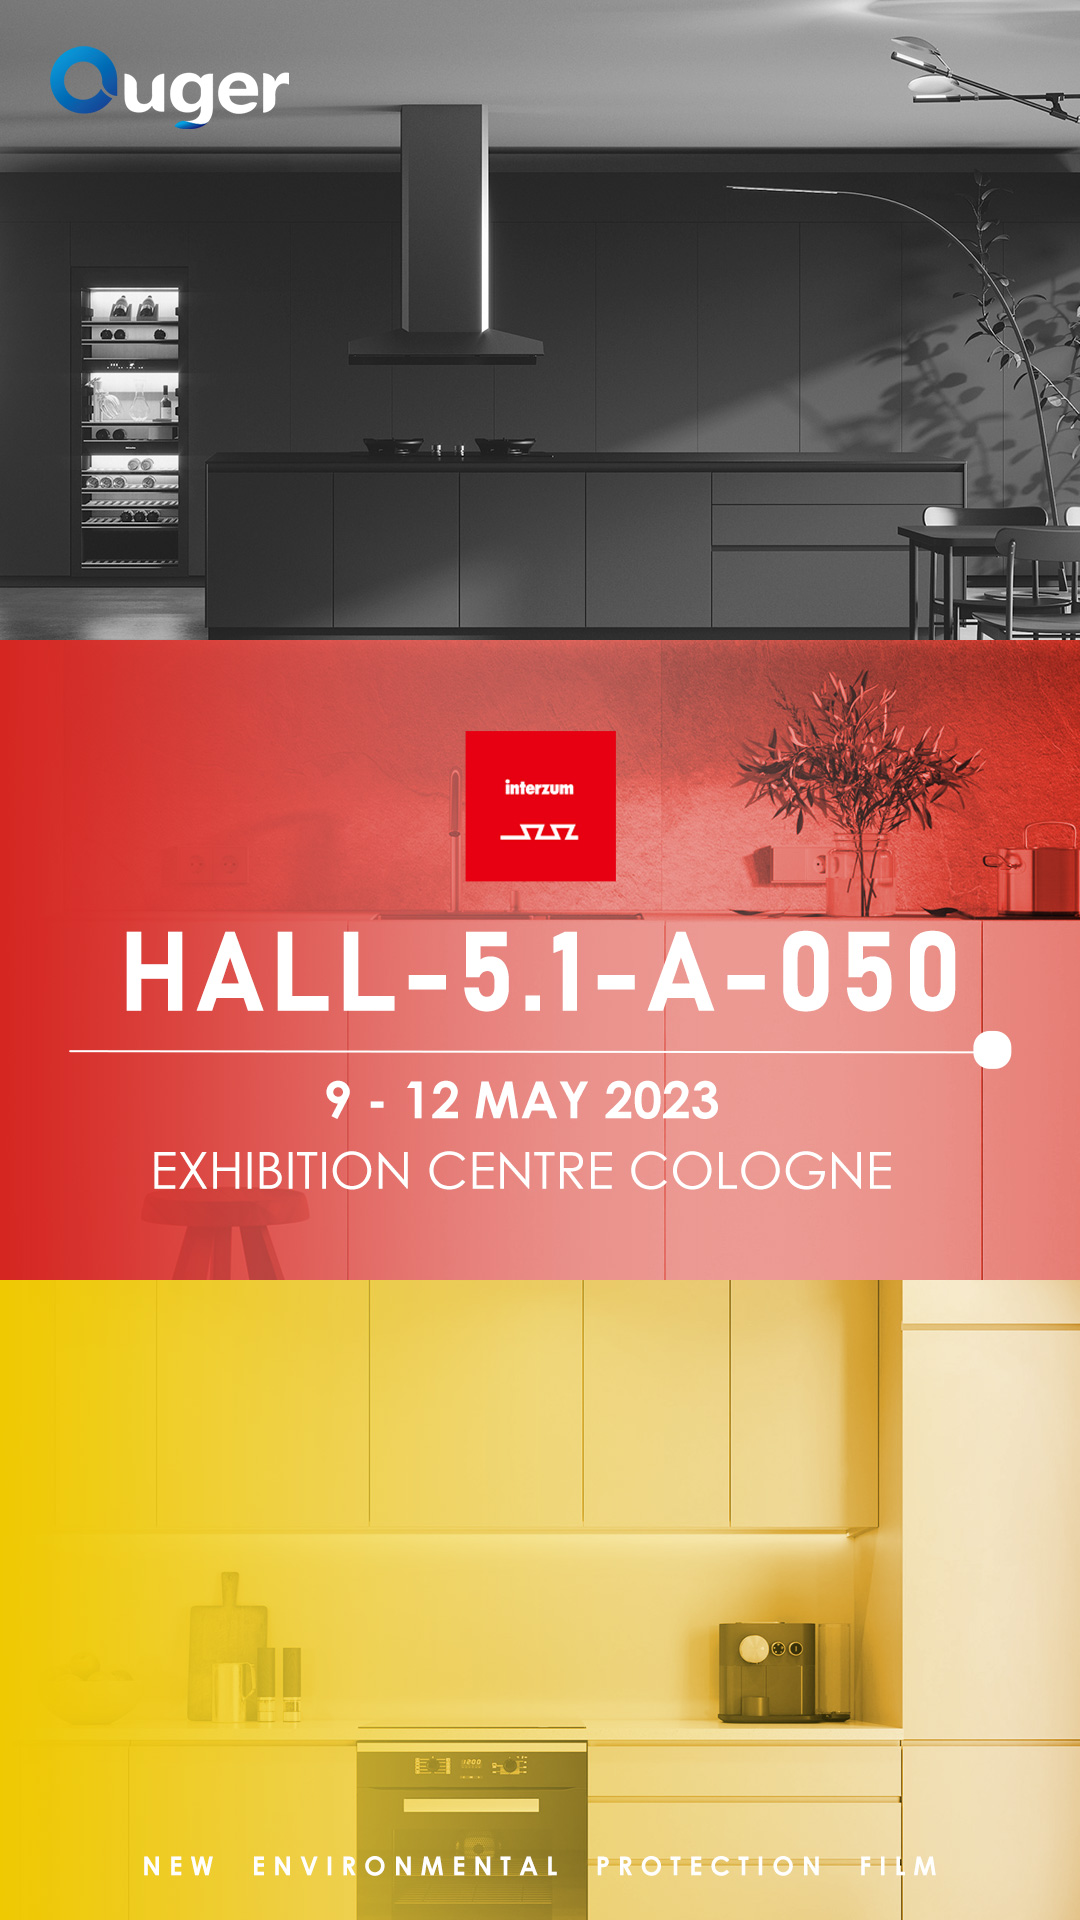 Interzum 2023--Ouger is here too